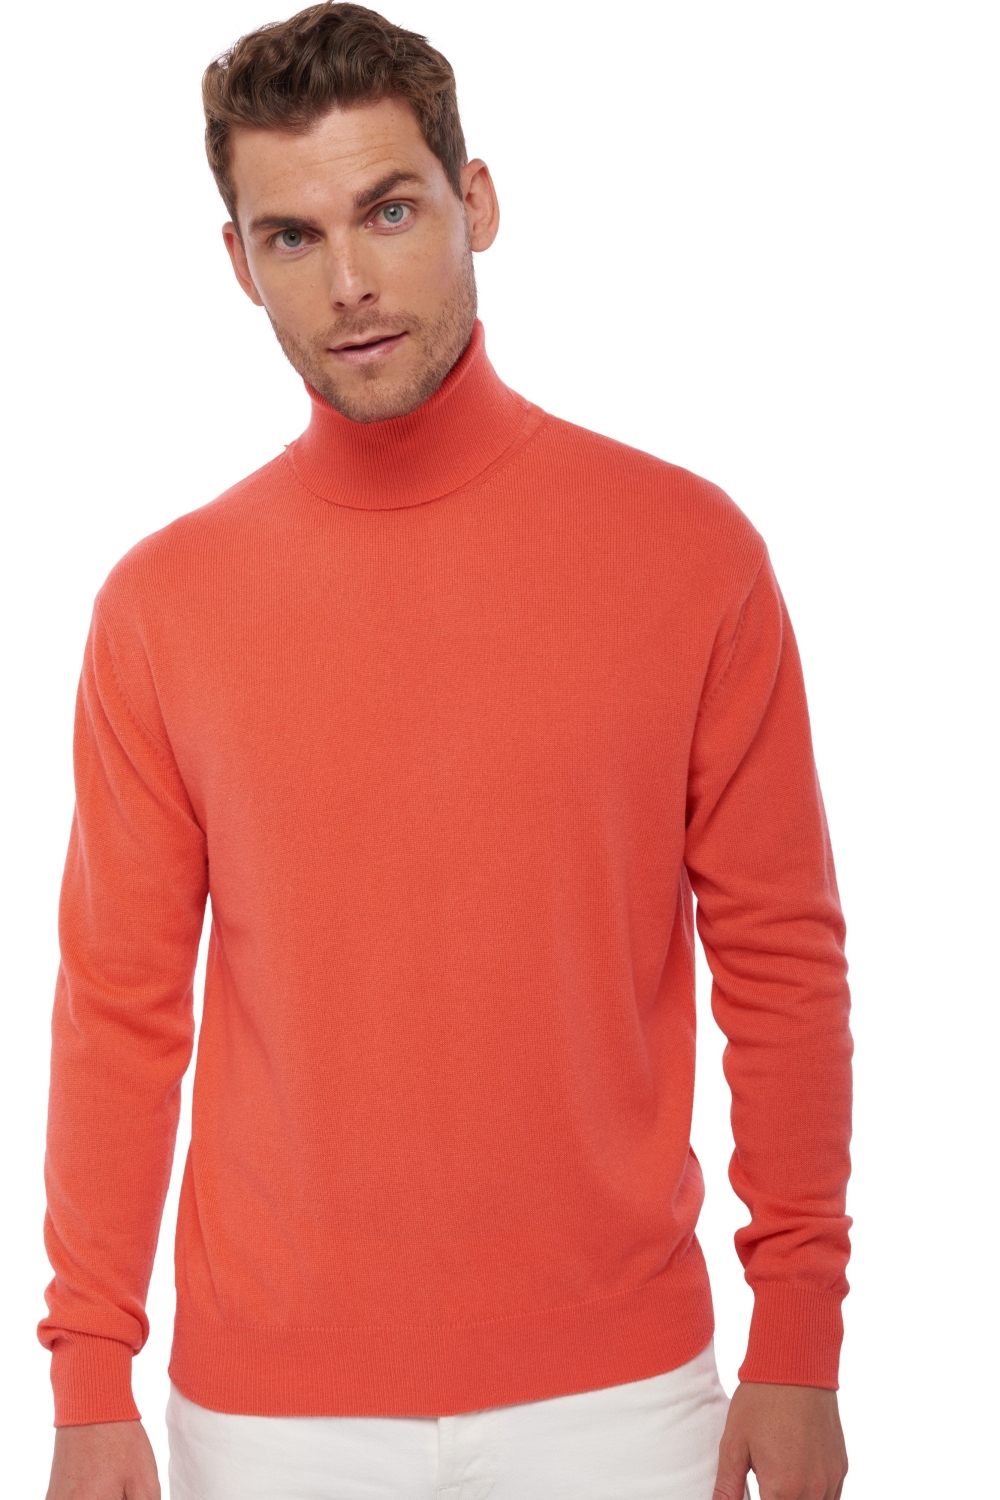 Cachemire pull homme col roule edgar corail lumineux xs